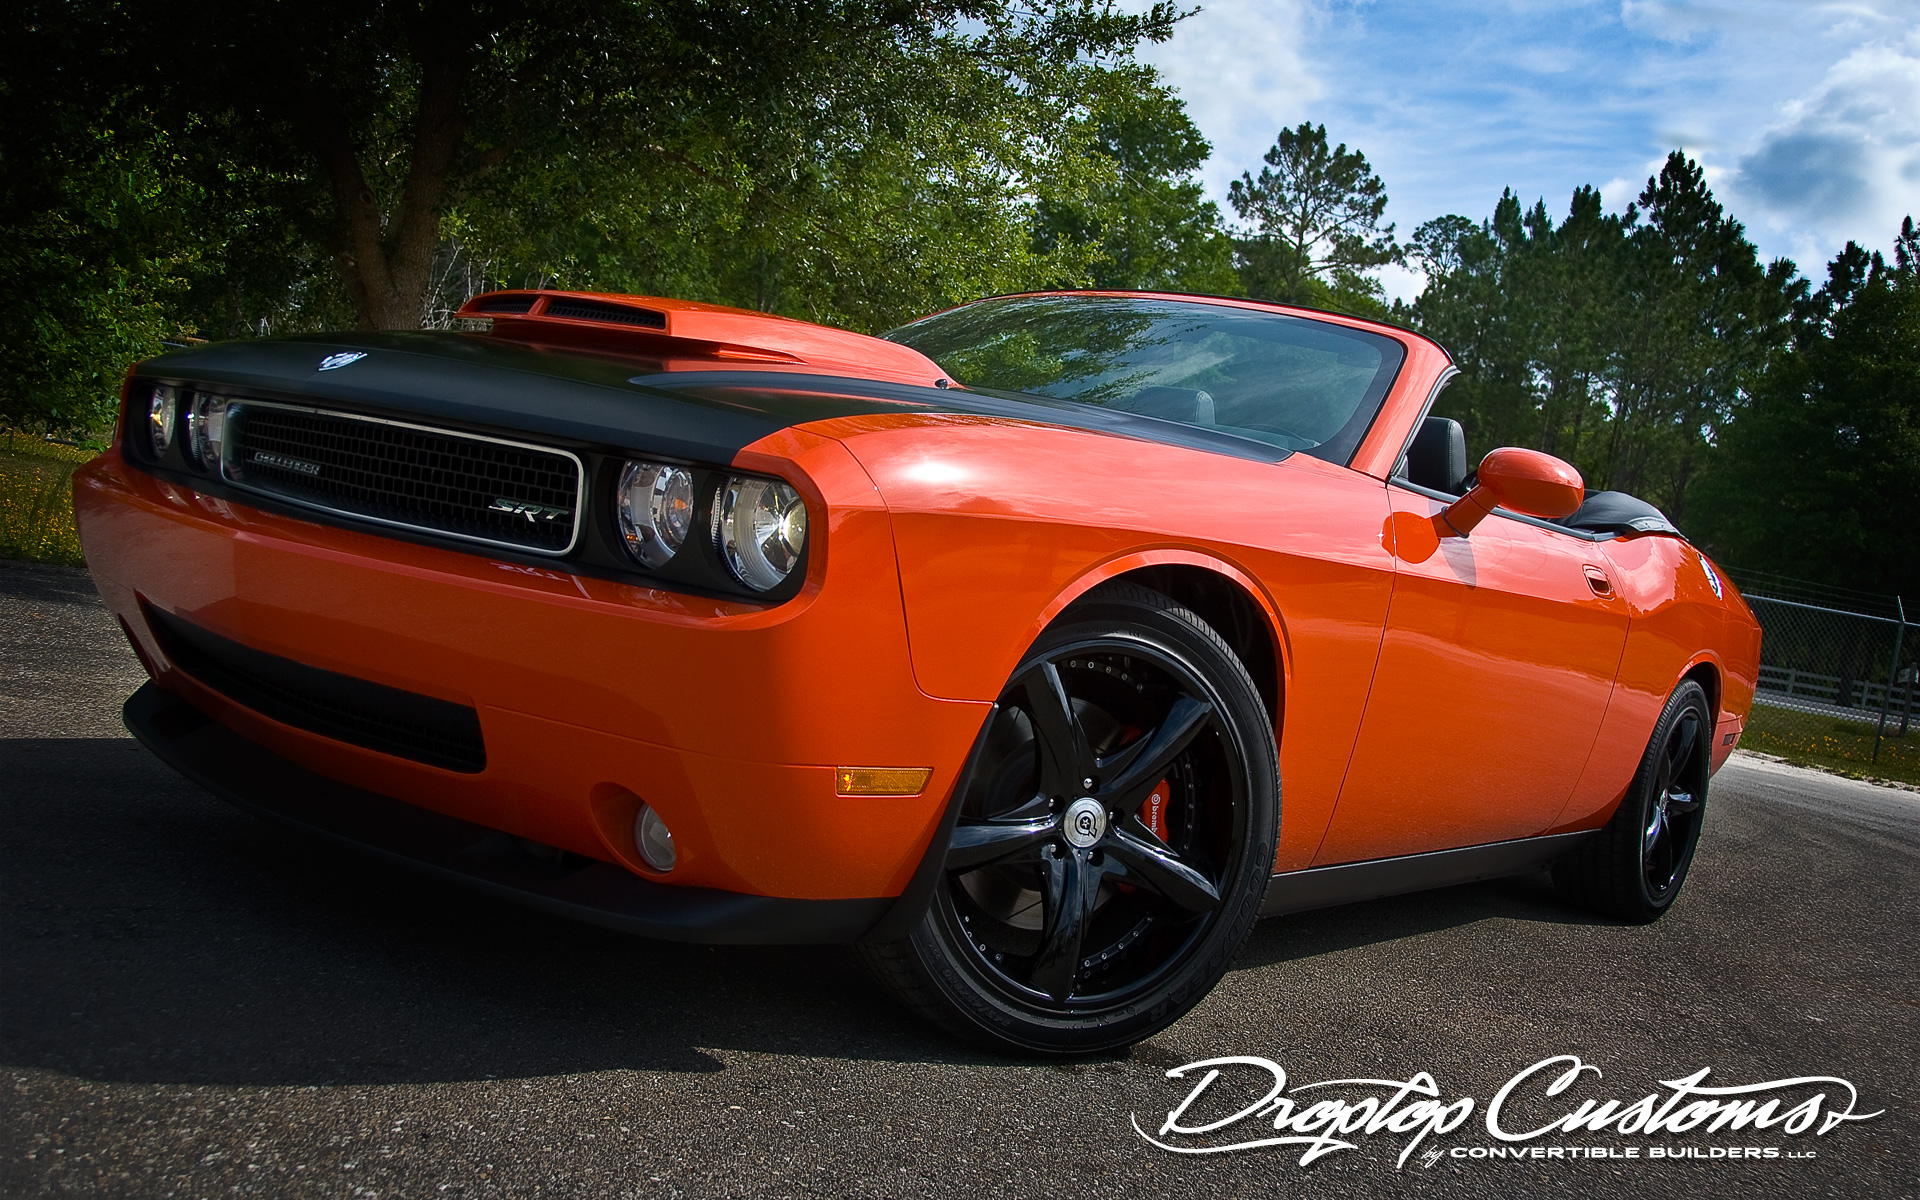 Is There a New Dodge Challenger Convertible in Your Future?